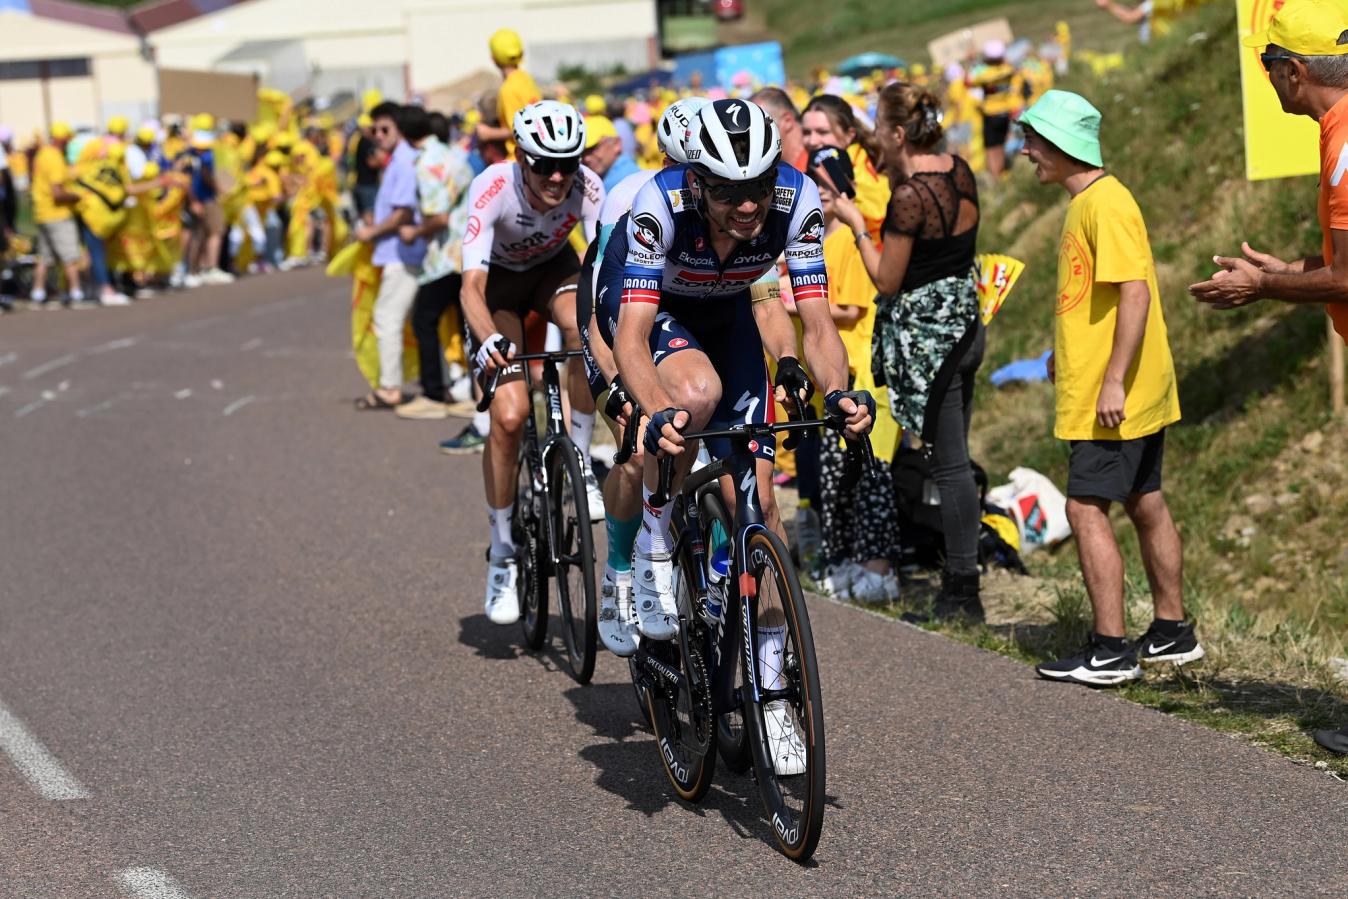 It was Kasper Asgreen who seemed the strongest on the day, but he was unable to shake Matej Mohorič or Ben O’Connor as they approached Poligny